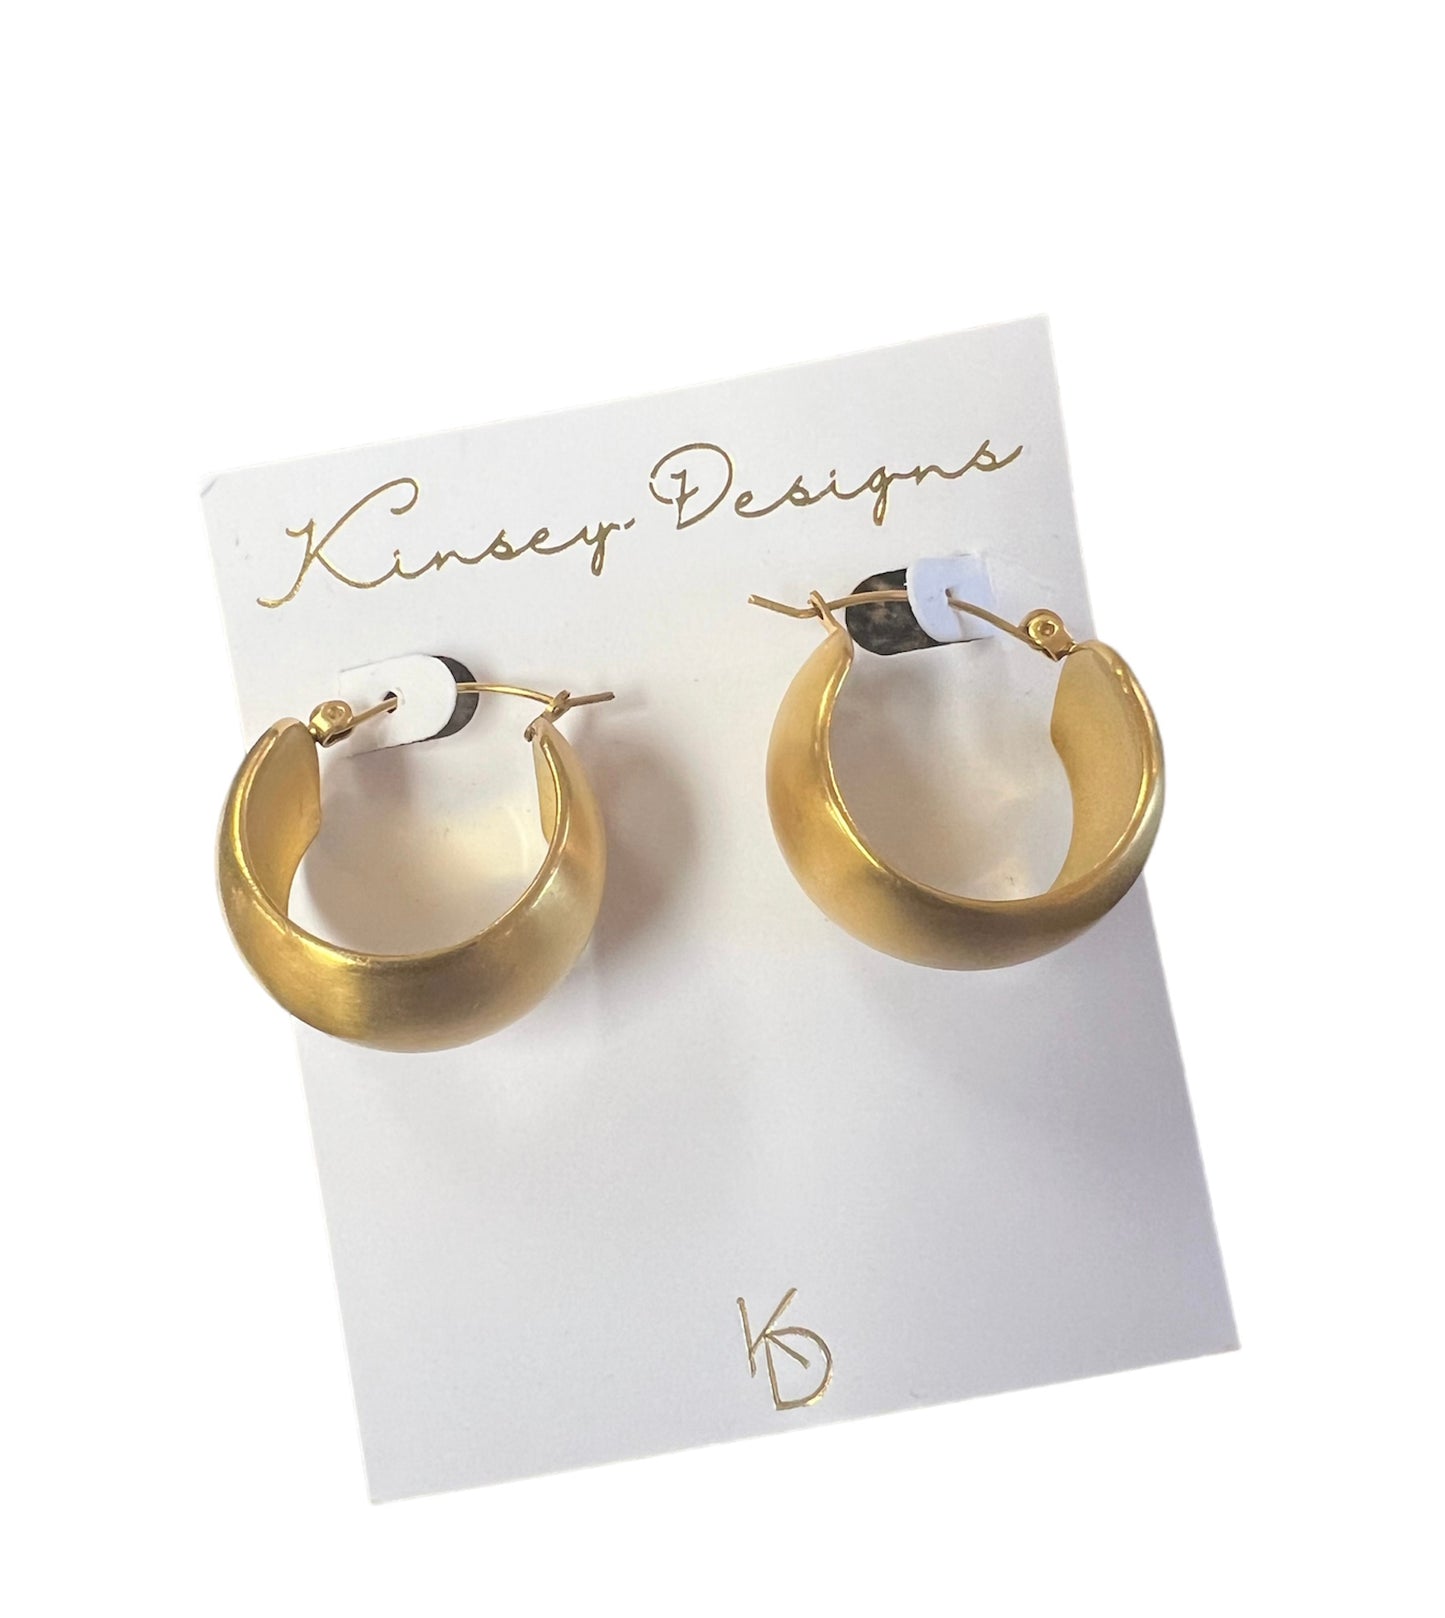 Kinsey Designs Gold Dome Hoops